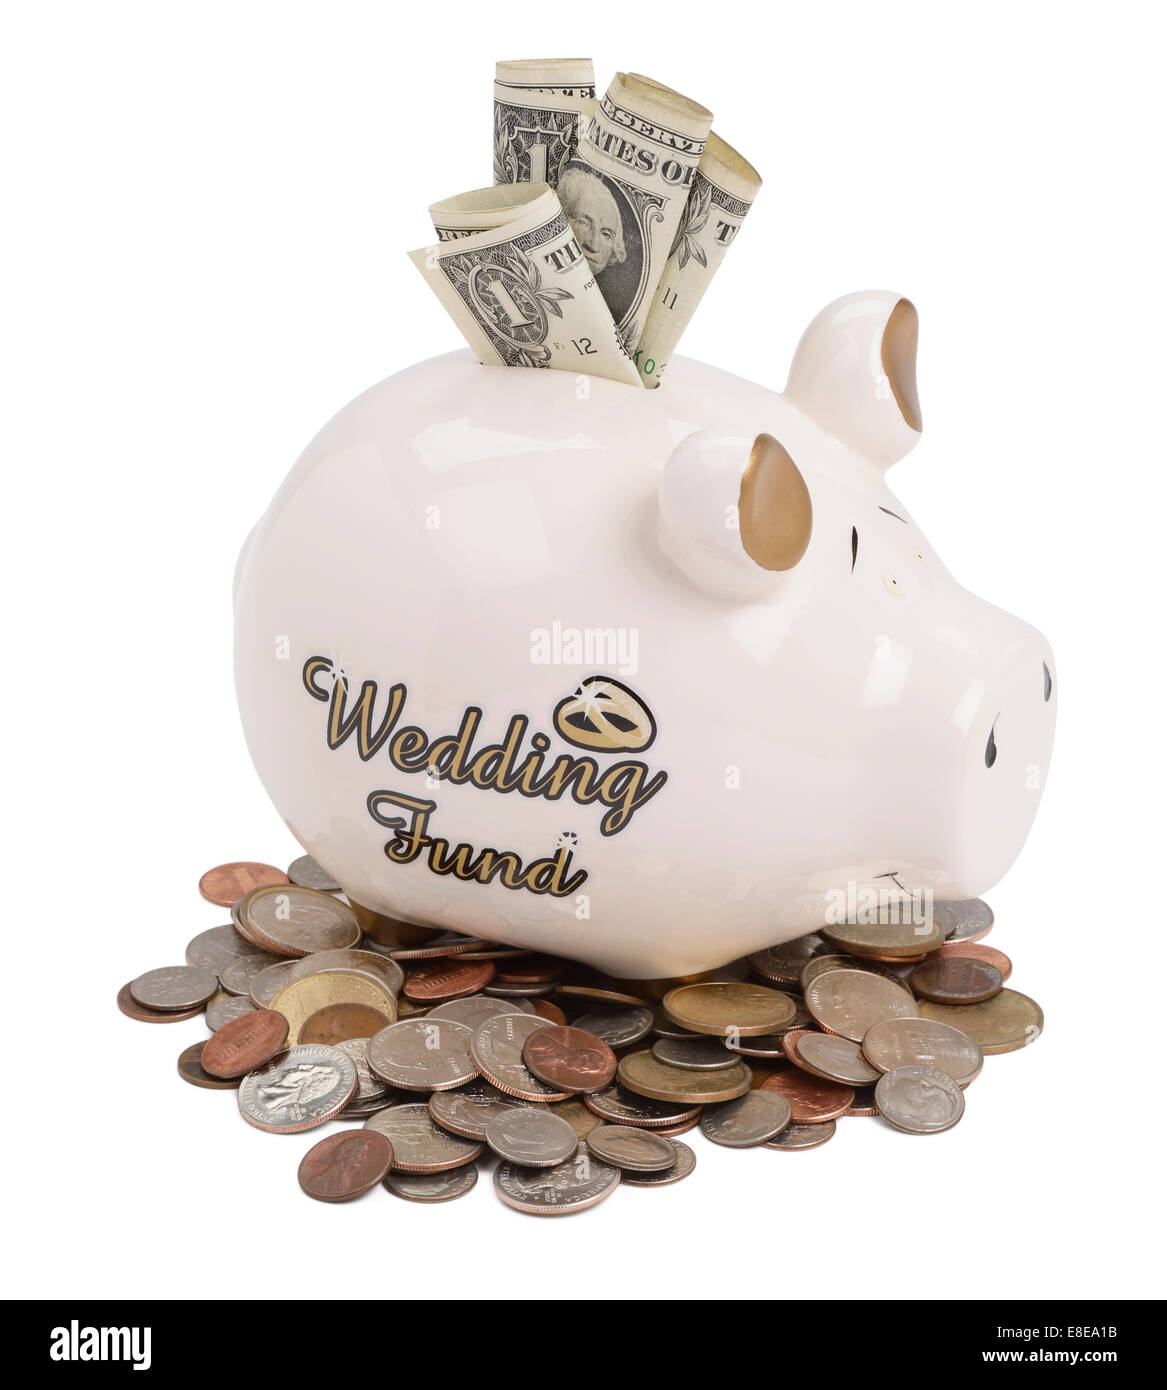 Wedding fund piggy bank with US dollar coins and notes Stock Photo